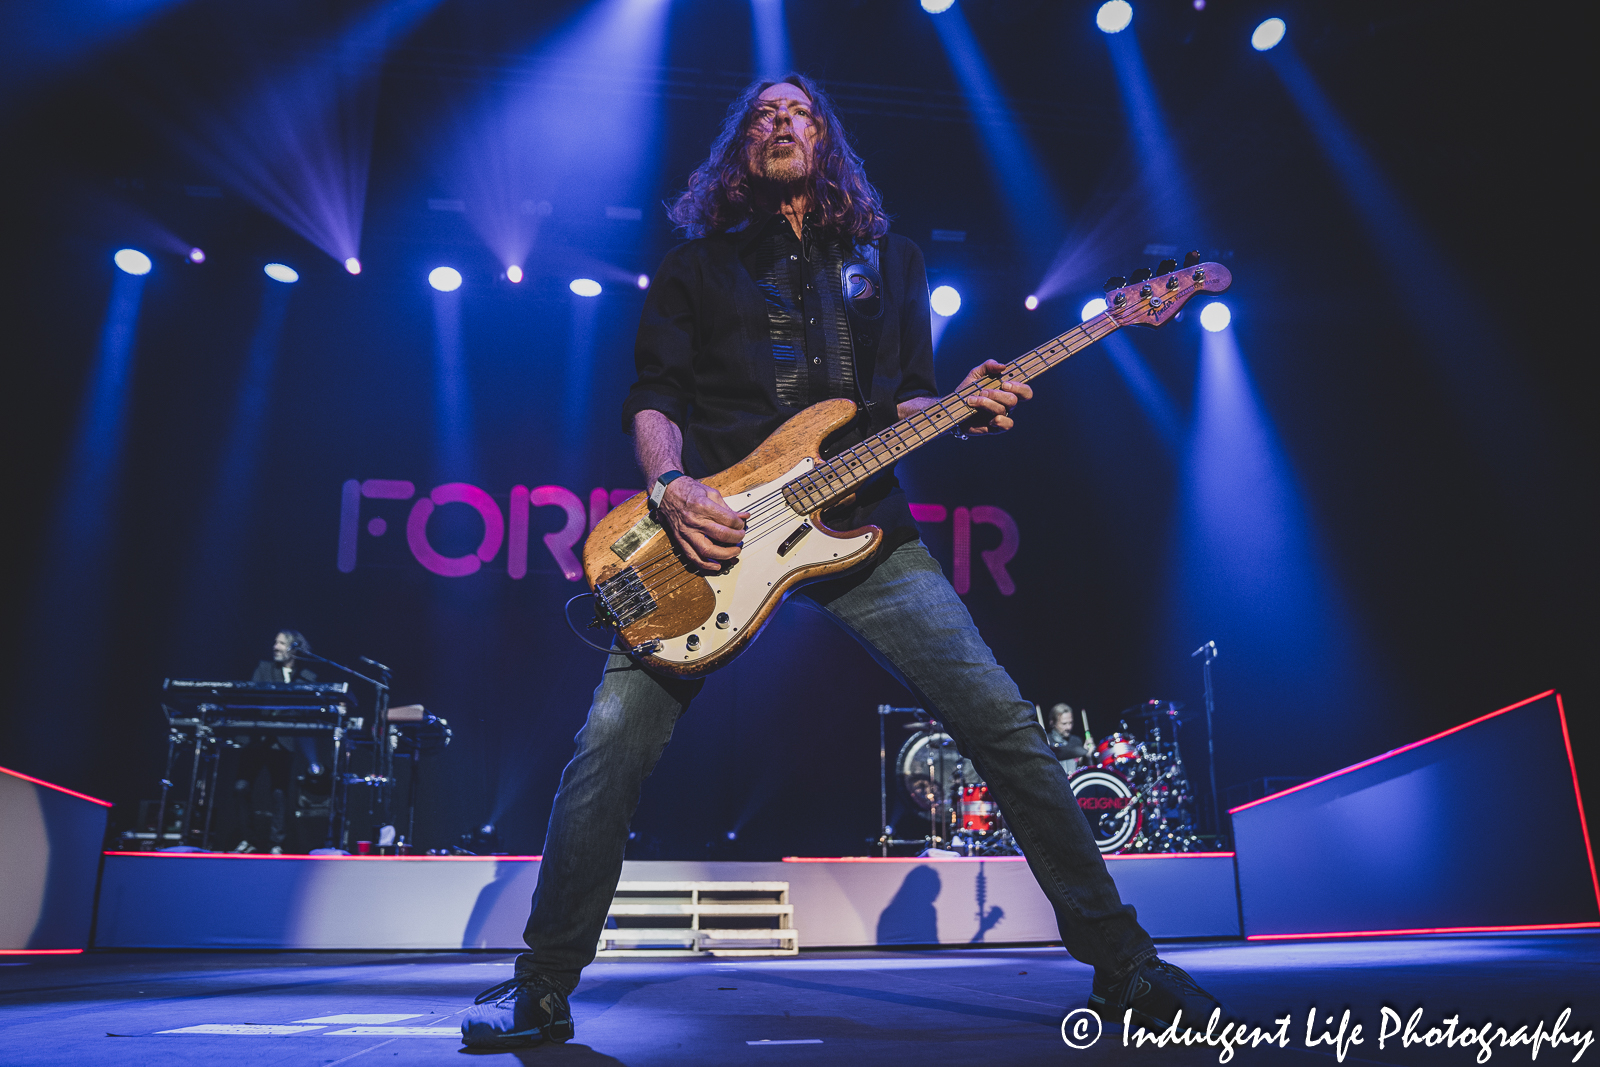 Foreigner bass guitarist Jeff Pilson performing with keyboard player Michael Bluestein and drummer Chris Frazier at Hartman Arena in Park City, KS on April 30, 2023.